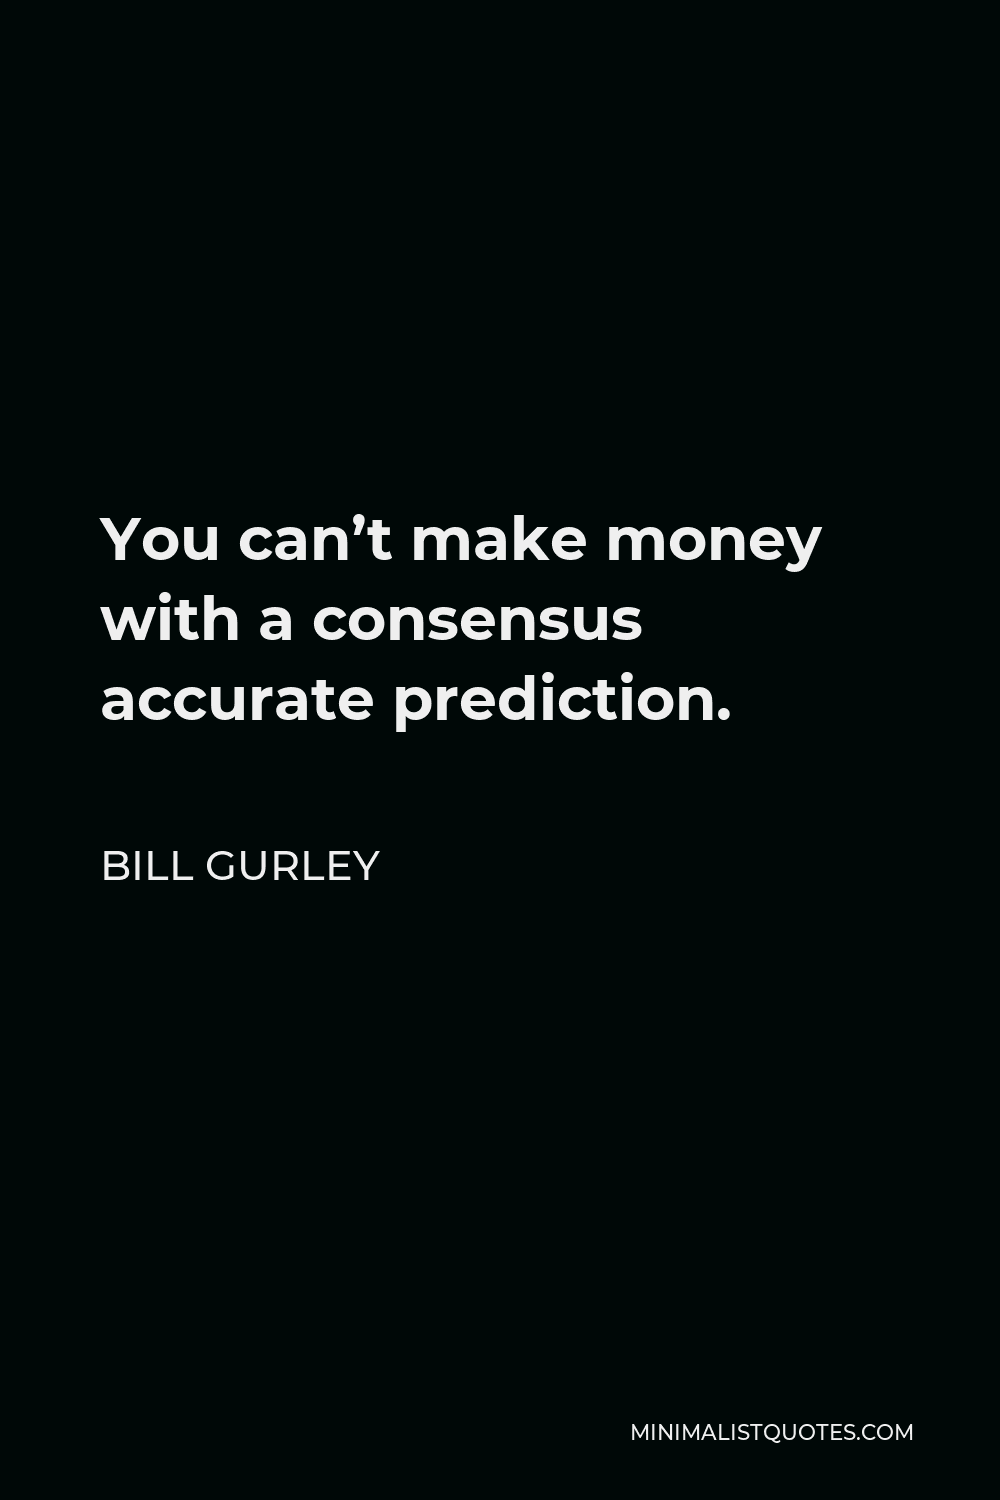 Bill Gurley Quote - You can’t make money with a consensus accurate prediction.